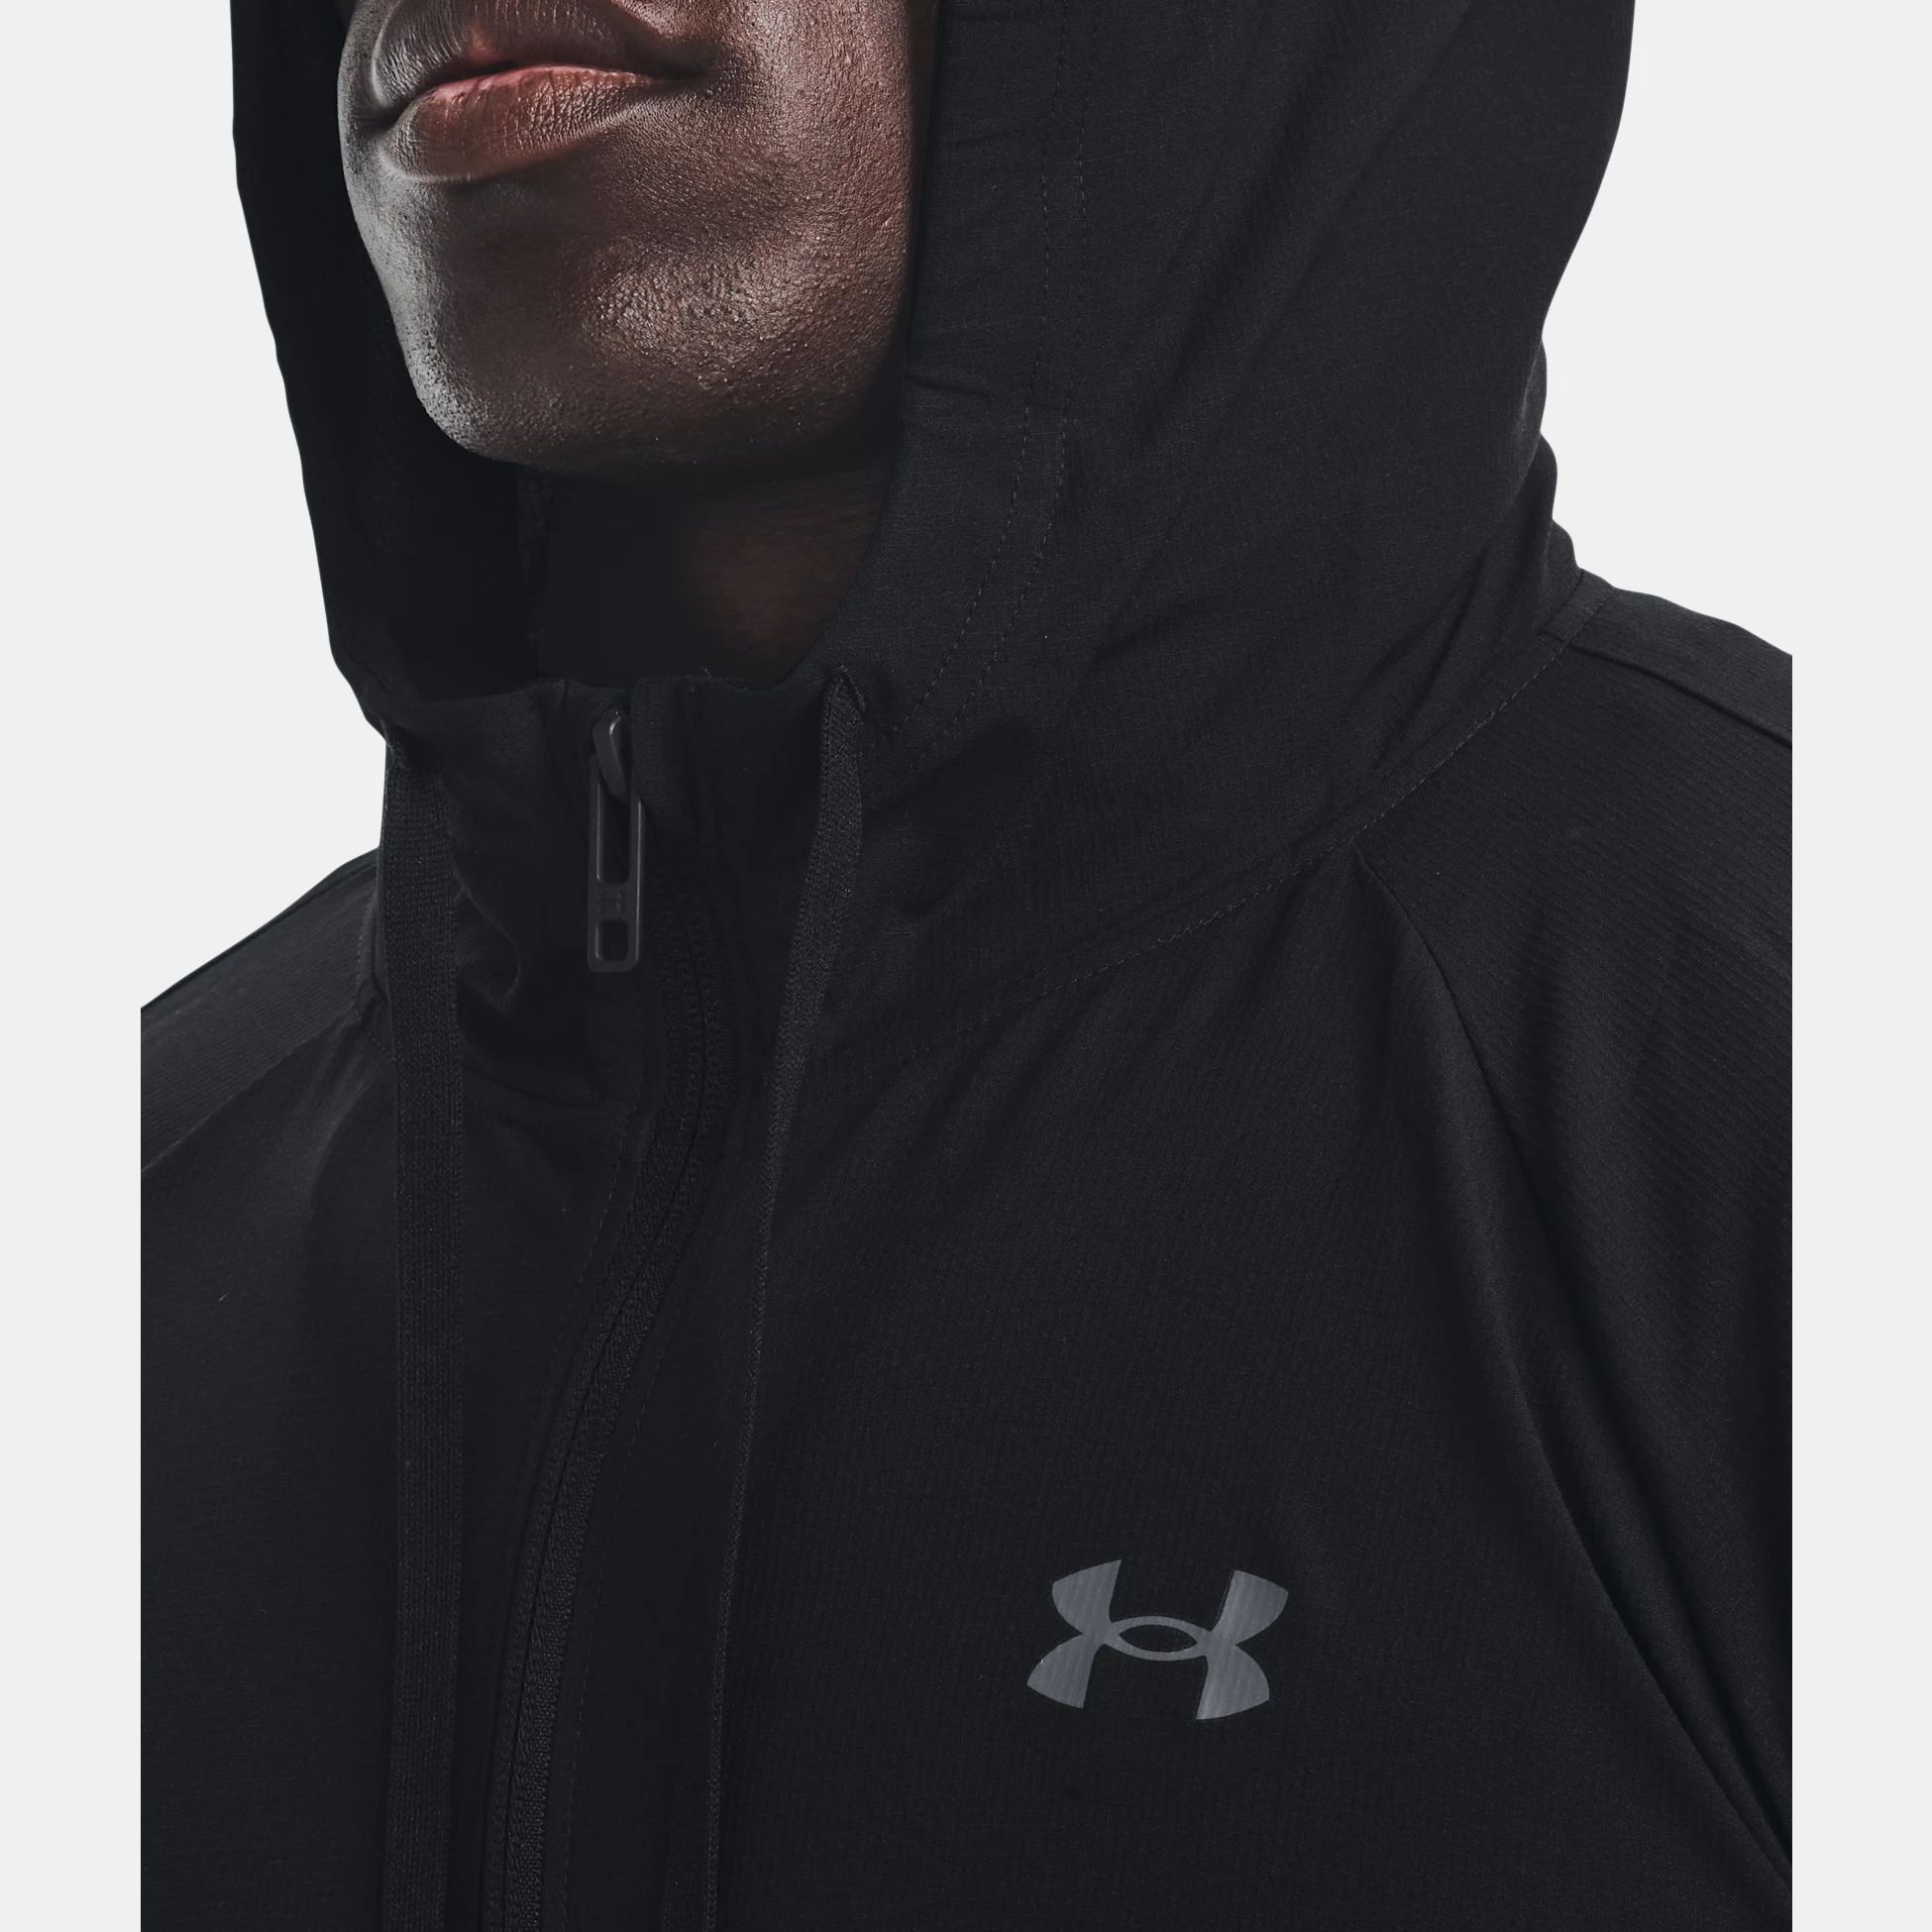 Jackets & Vests -  under armour UA Woven Perforated Windbreaker Jacket